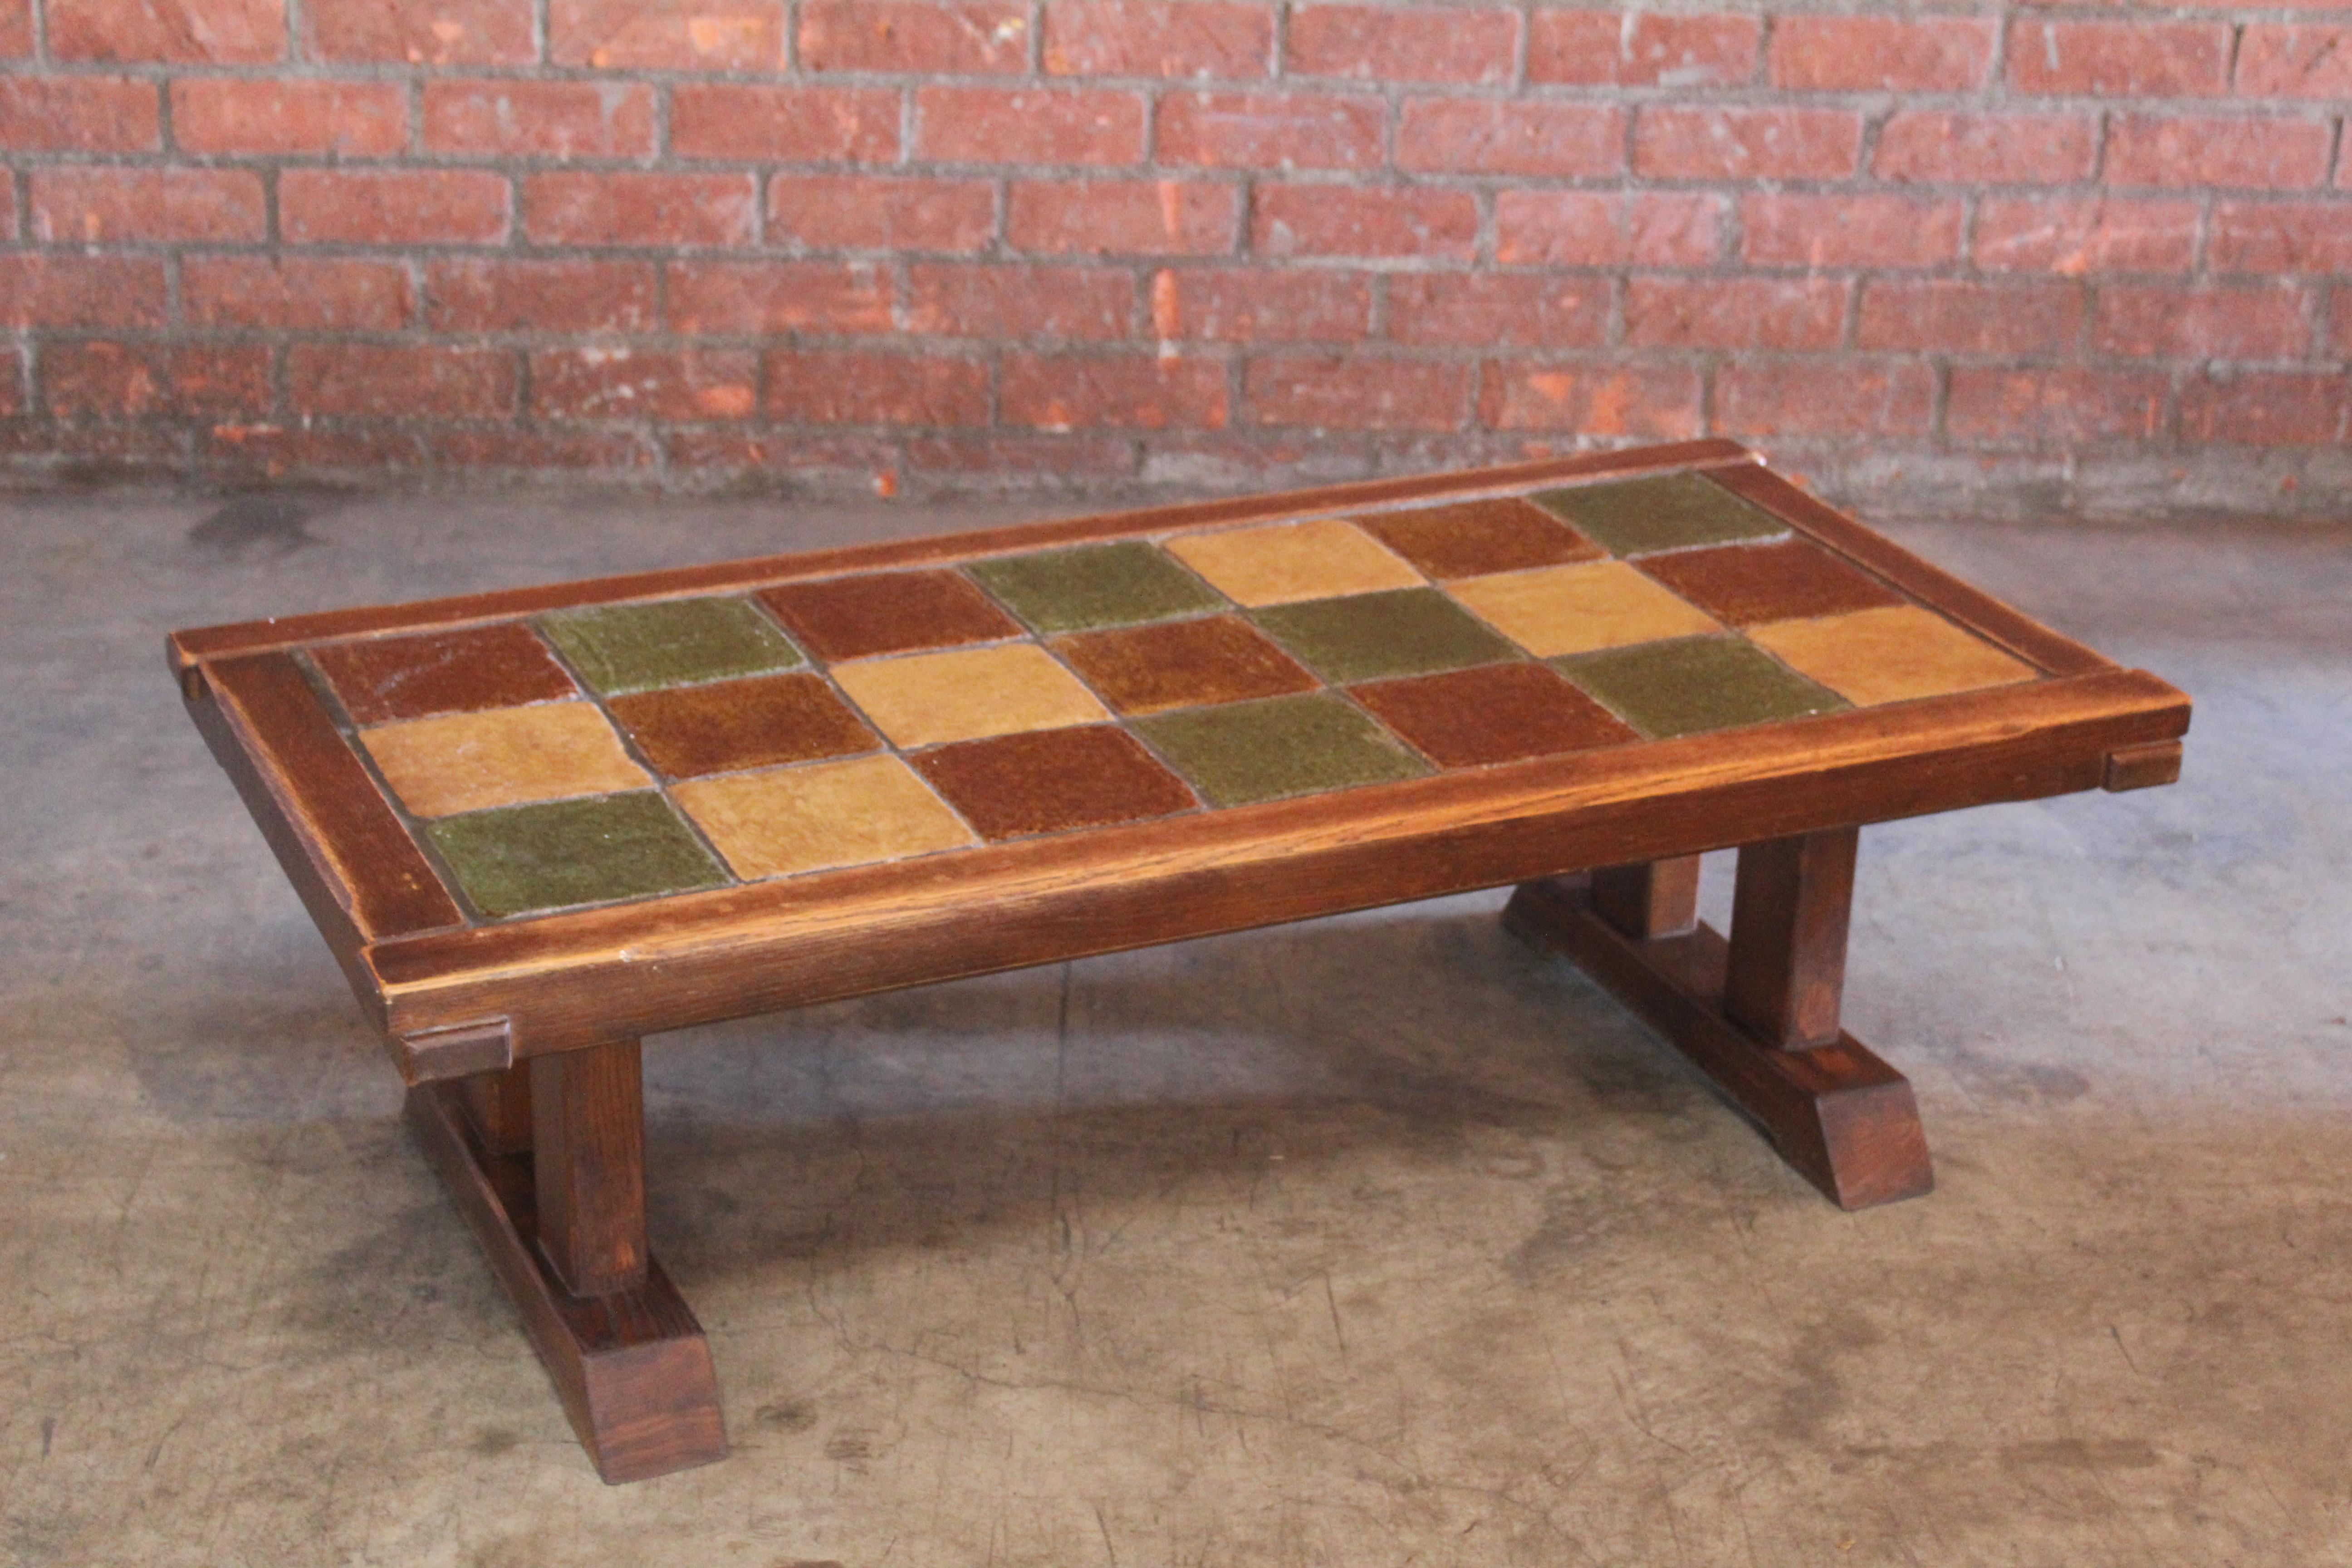 Ceramic Oak and Tile Coffee Table, France, 1950s